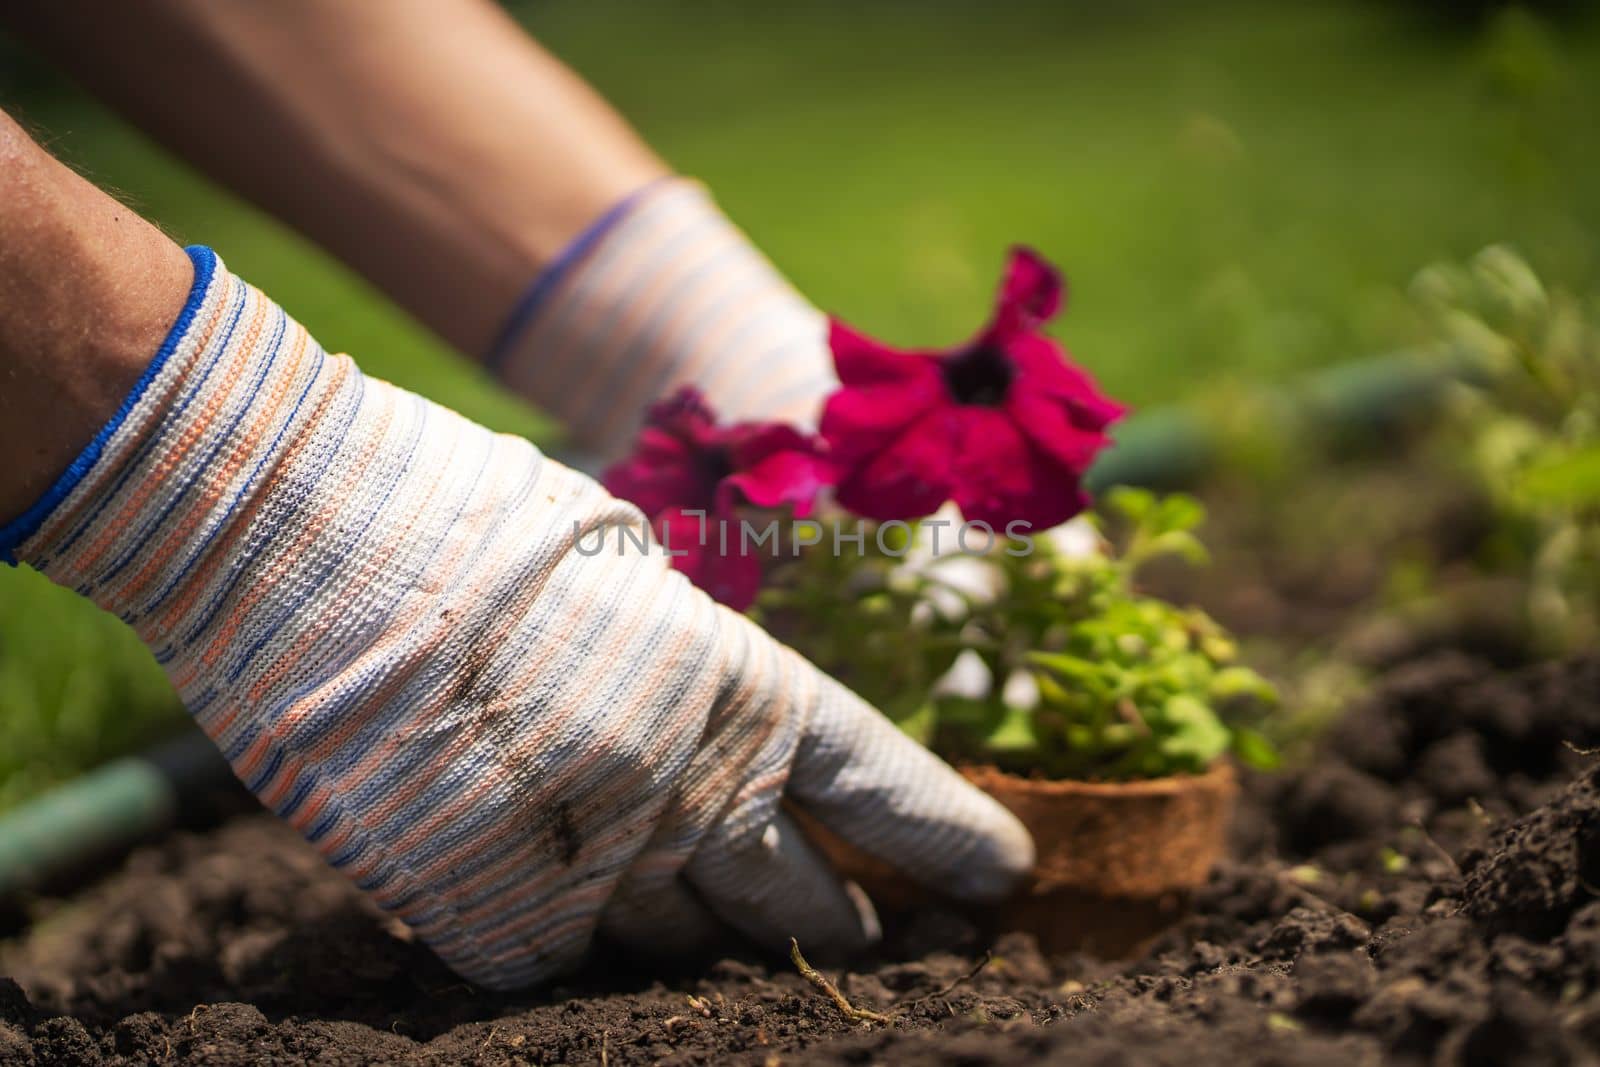 Gardener with hands in gloves cultivates plants. by africapink